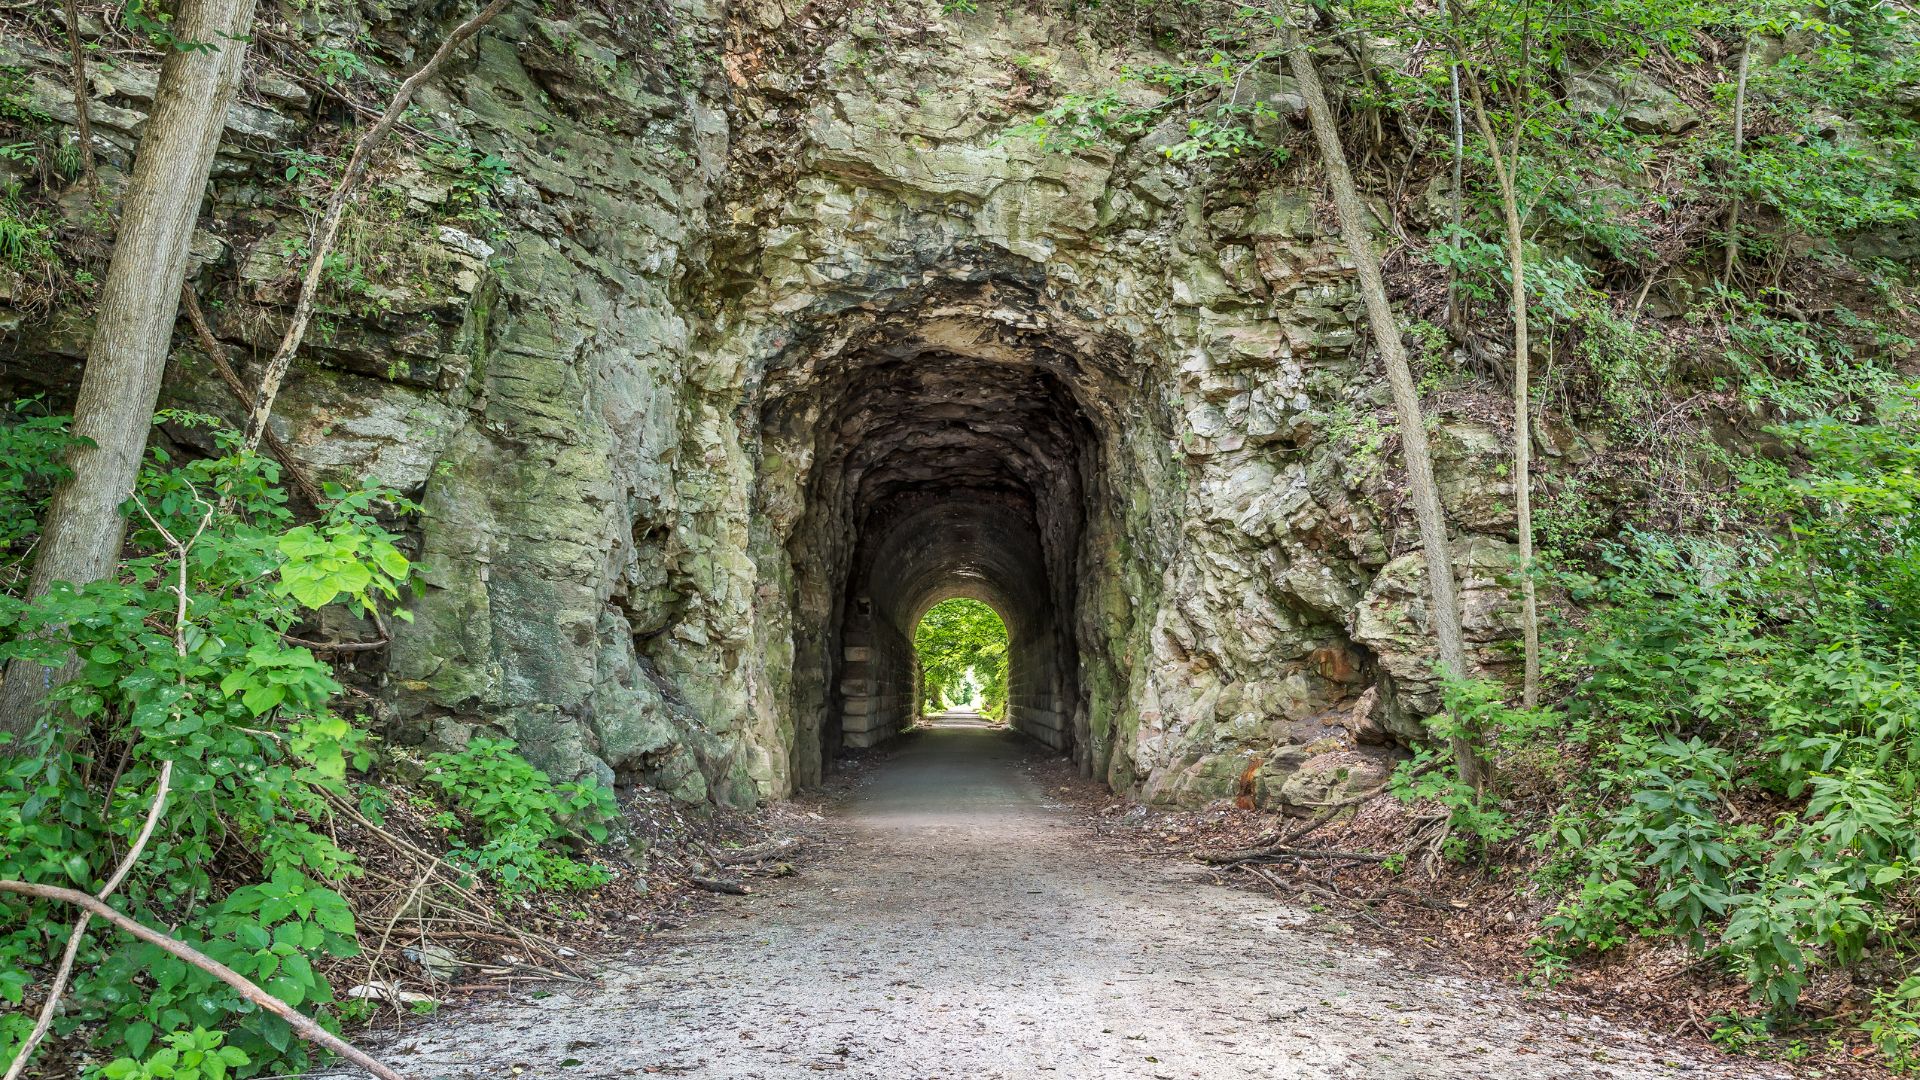 Arched entry through a rocky hillside into the Katy Trail in Missouri.